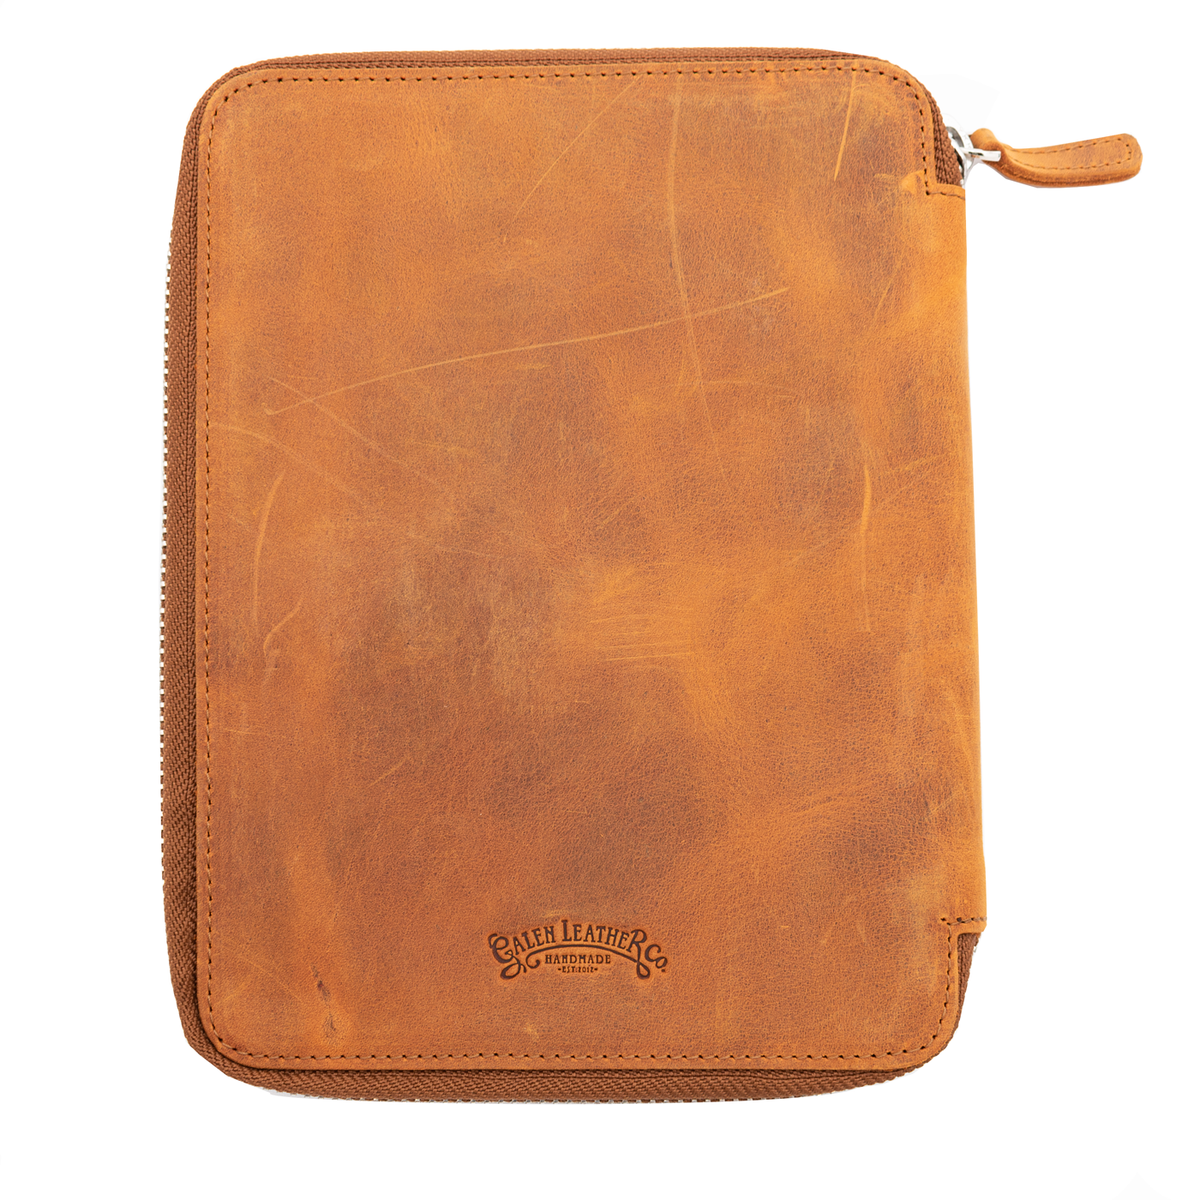 Galen Leather Co. Zippered A5 Notebook Folio- Crazy Horse Brown